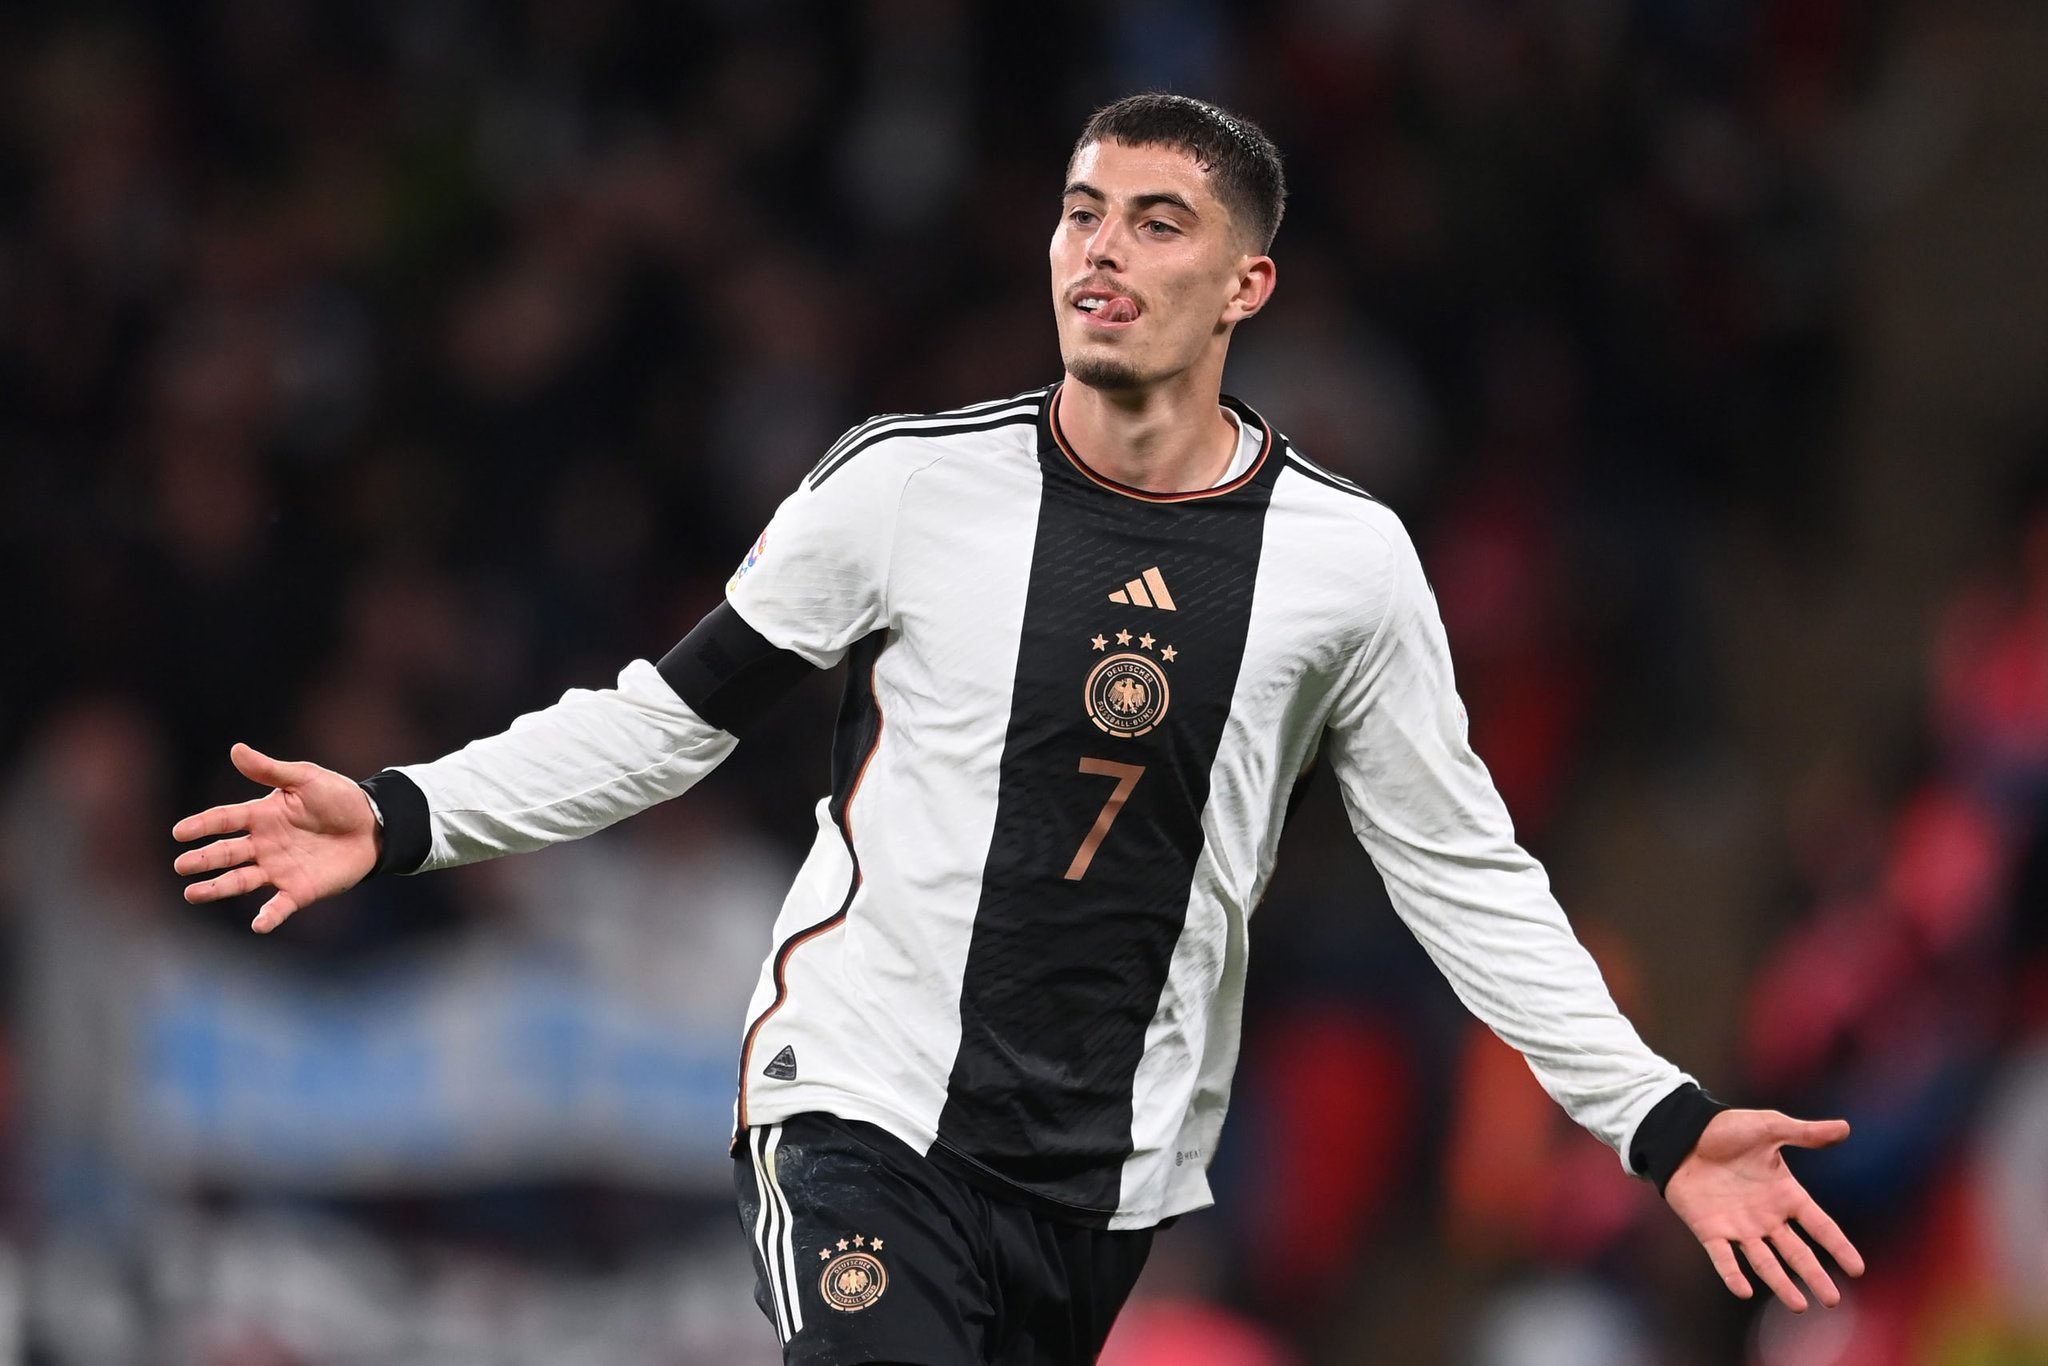 Kai Havertz scored a brace for Germany against England in the UEFA Nations League